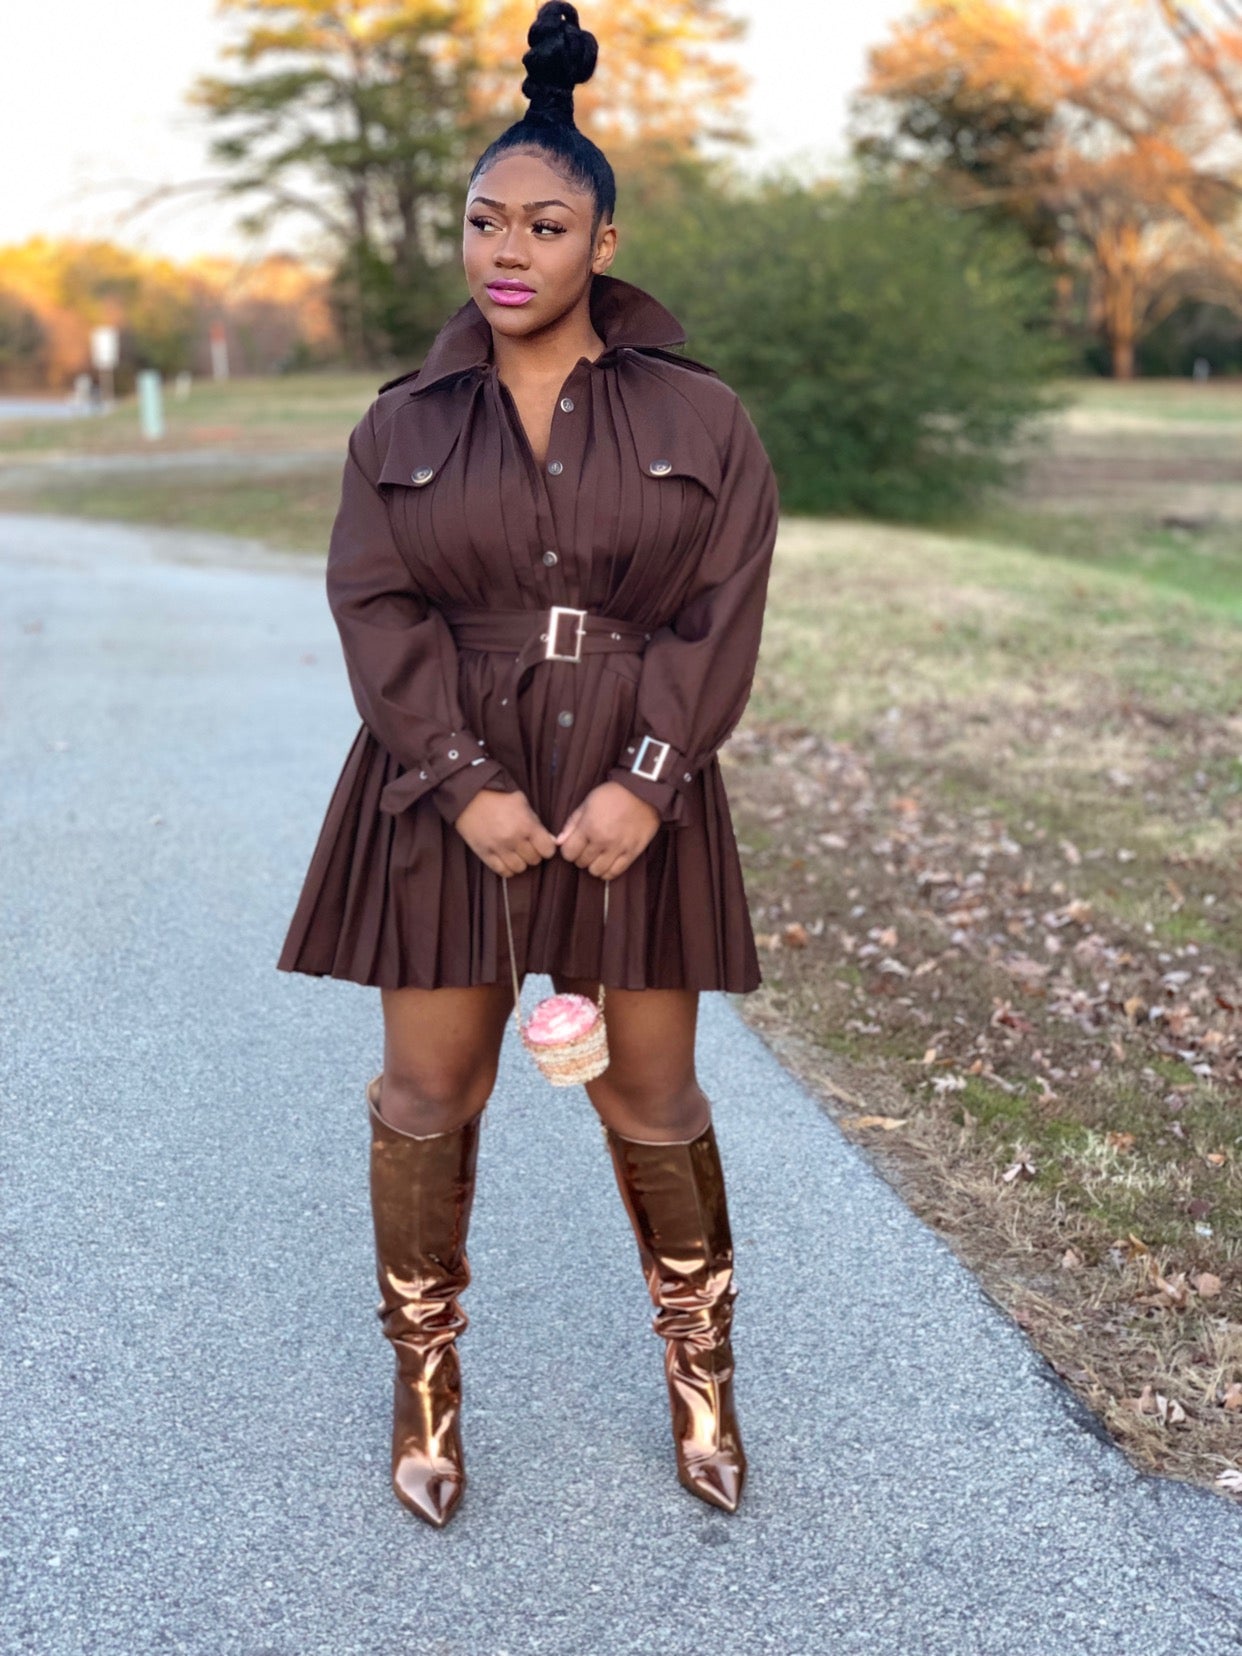 GOLDxTEAL Mousse Pleated Trench Coat. Gorgeous deep brown colored trench coat with a modern pleated body, waist belt and front button closure.